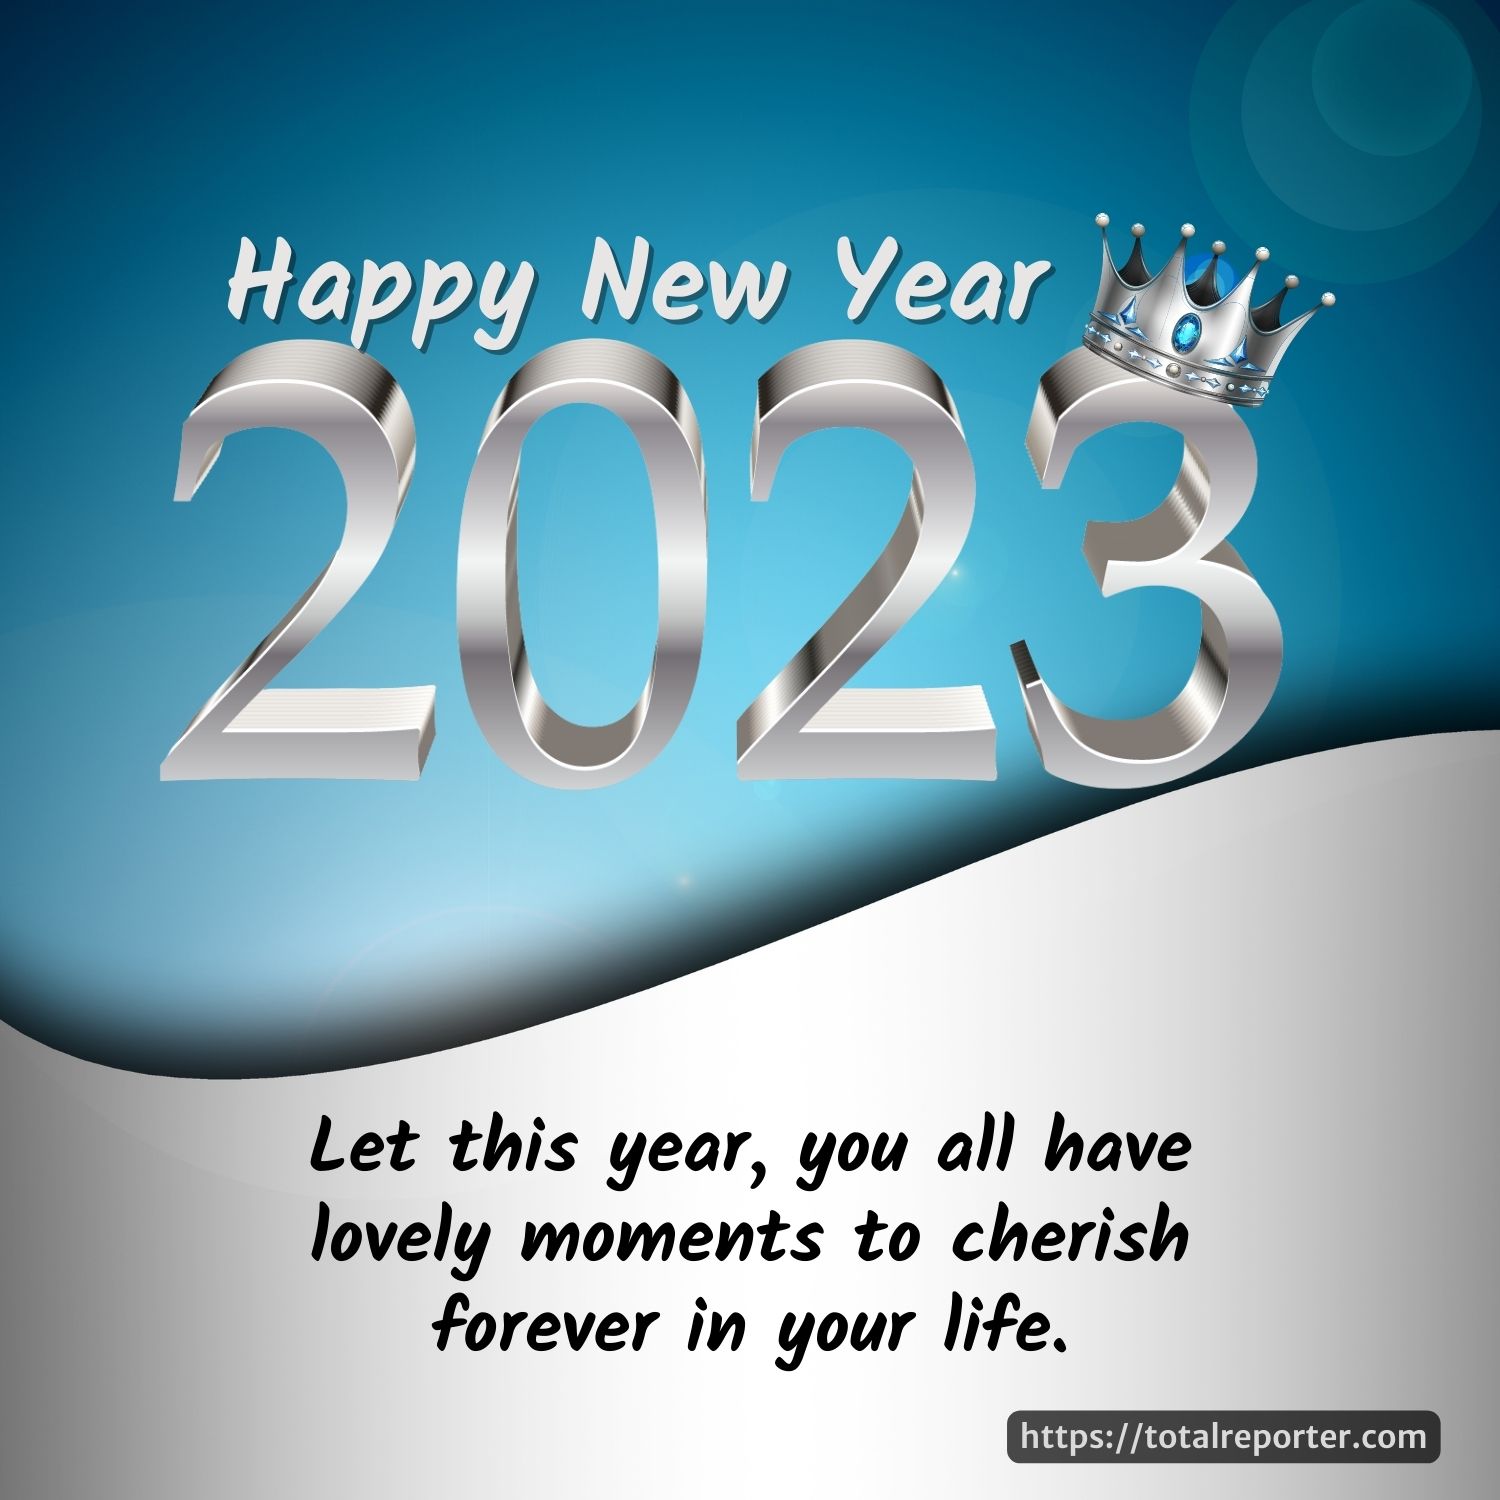 Happy New Year 2023 images For Whatsapp status